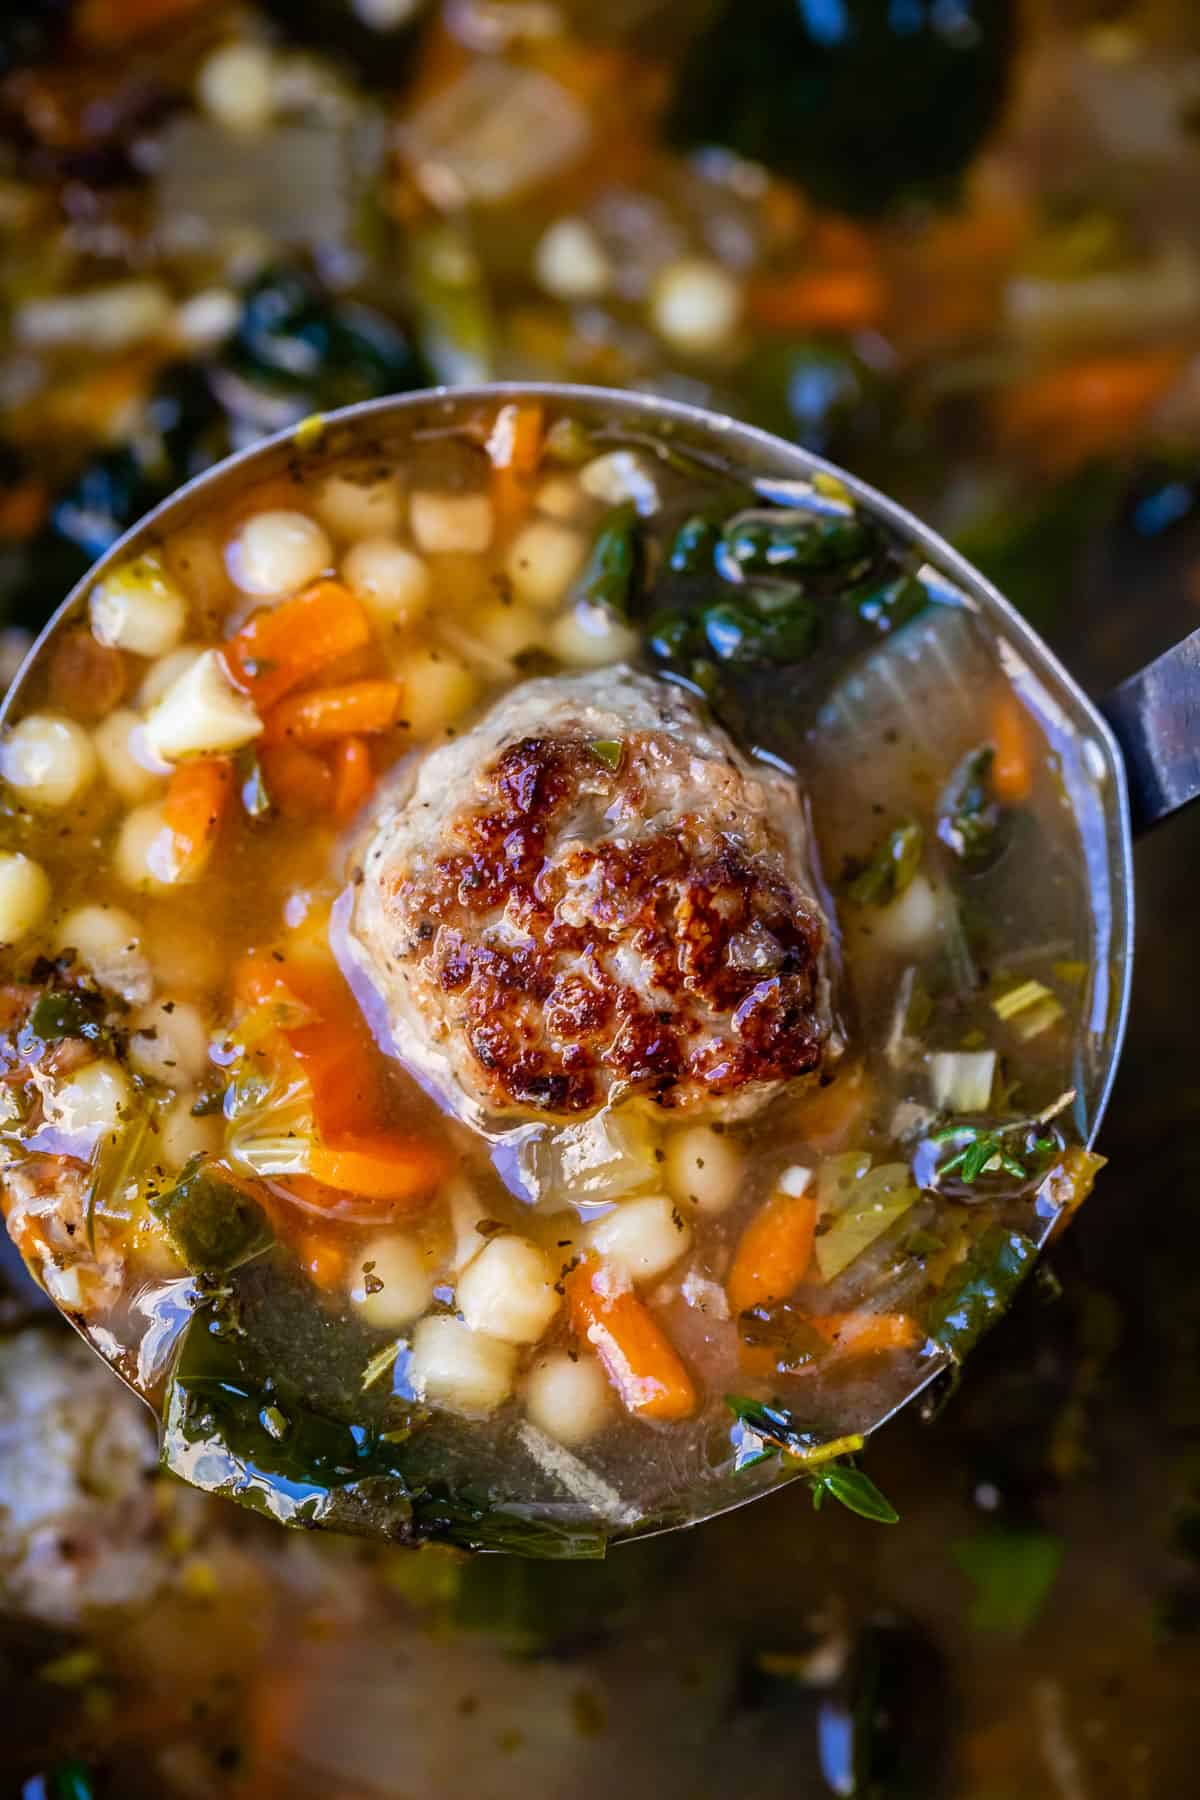 metal ladle filled with italian wedding soup which has a meatball, broth, pasta, and vegetables.